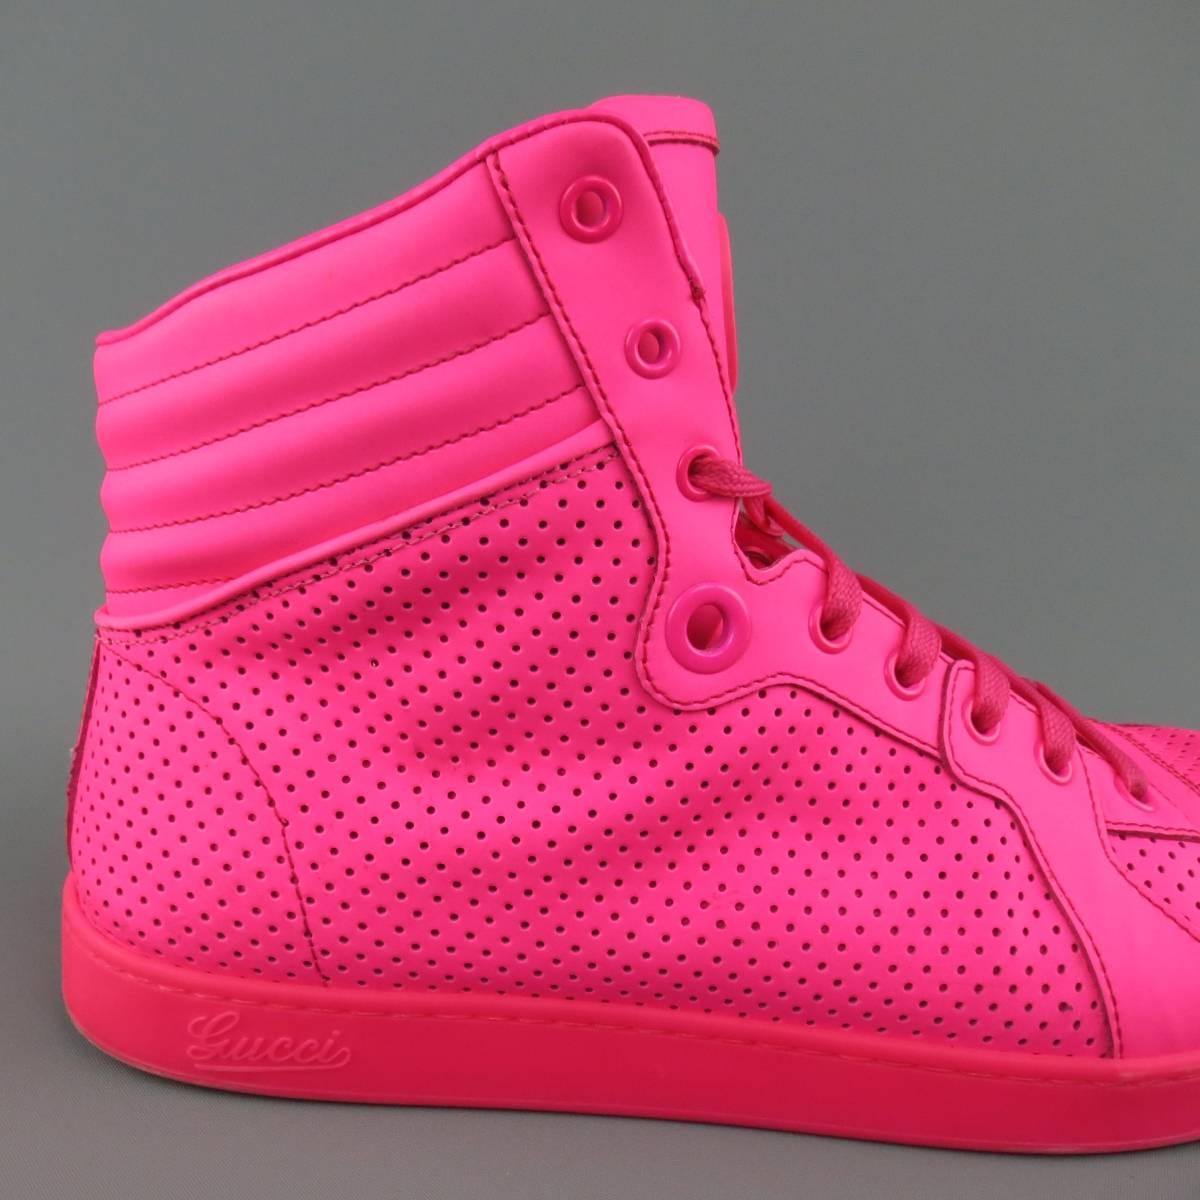 neon pink shoes mens